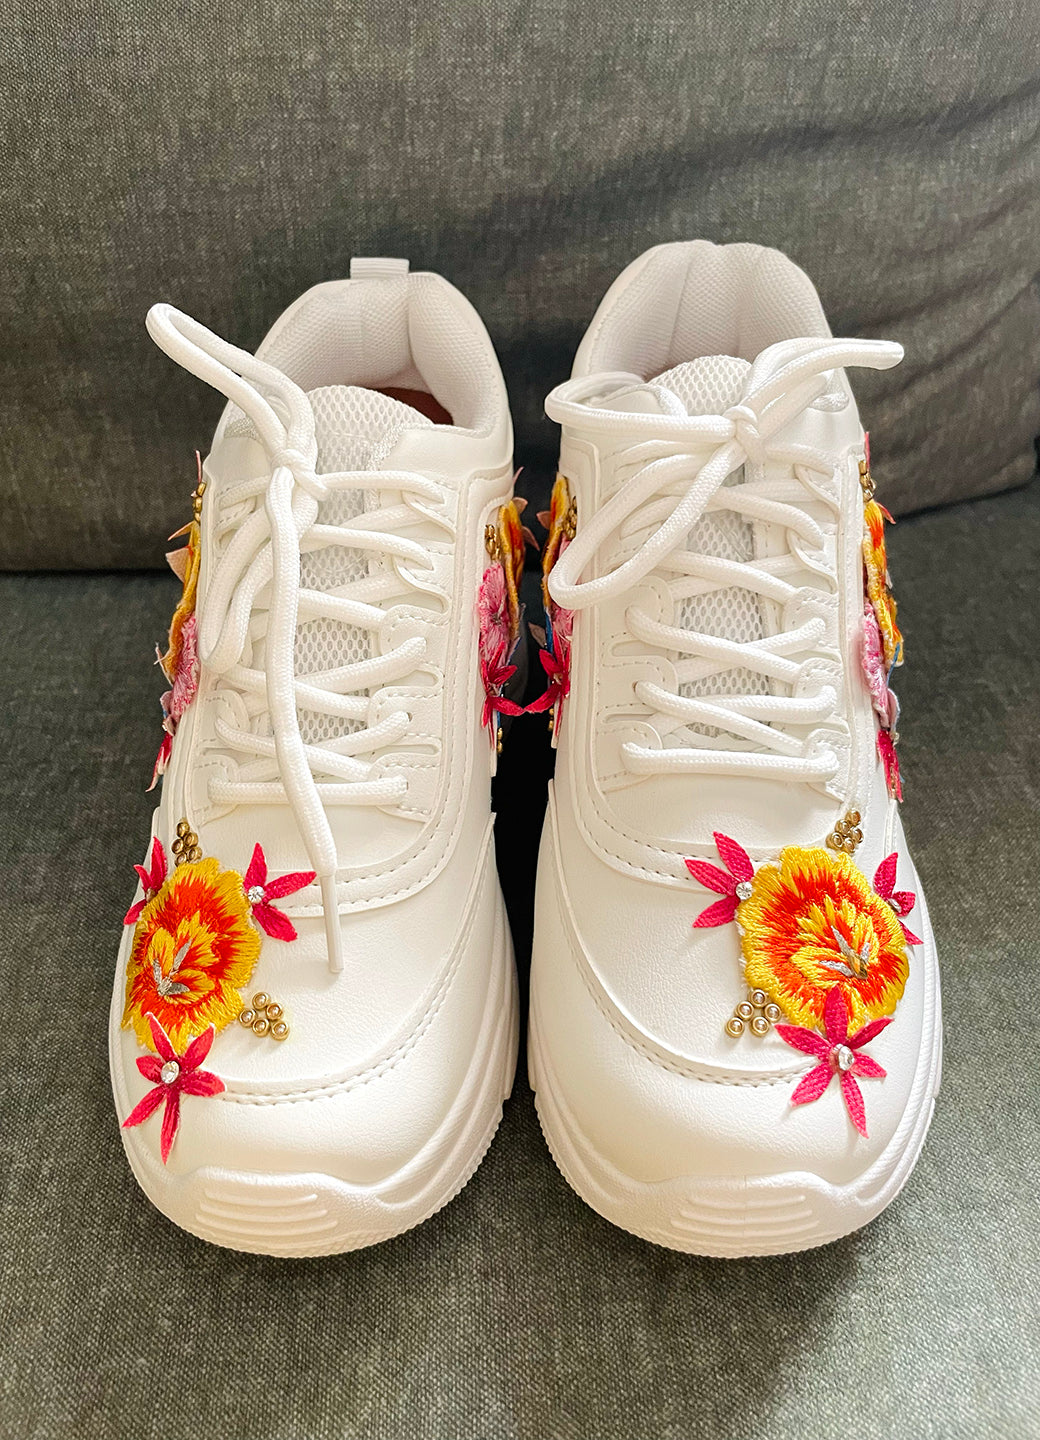 Nike Floral Shoes for sale in Walnut Hill, Illinois | Facebook Marketplace  | Facebook